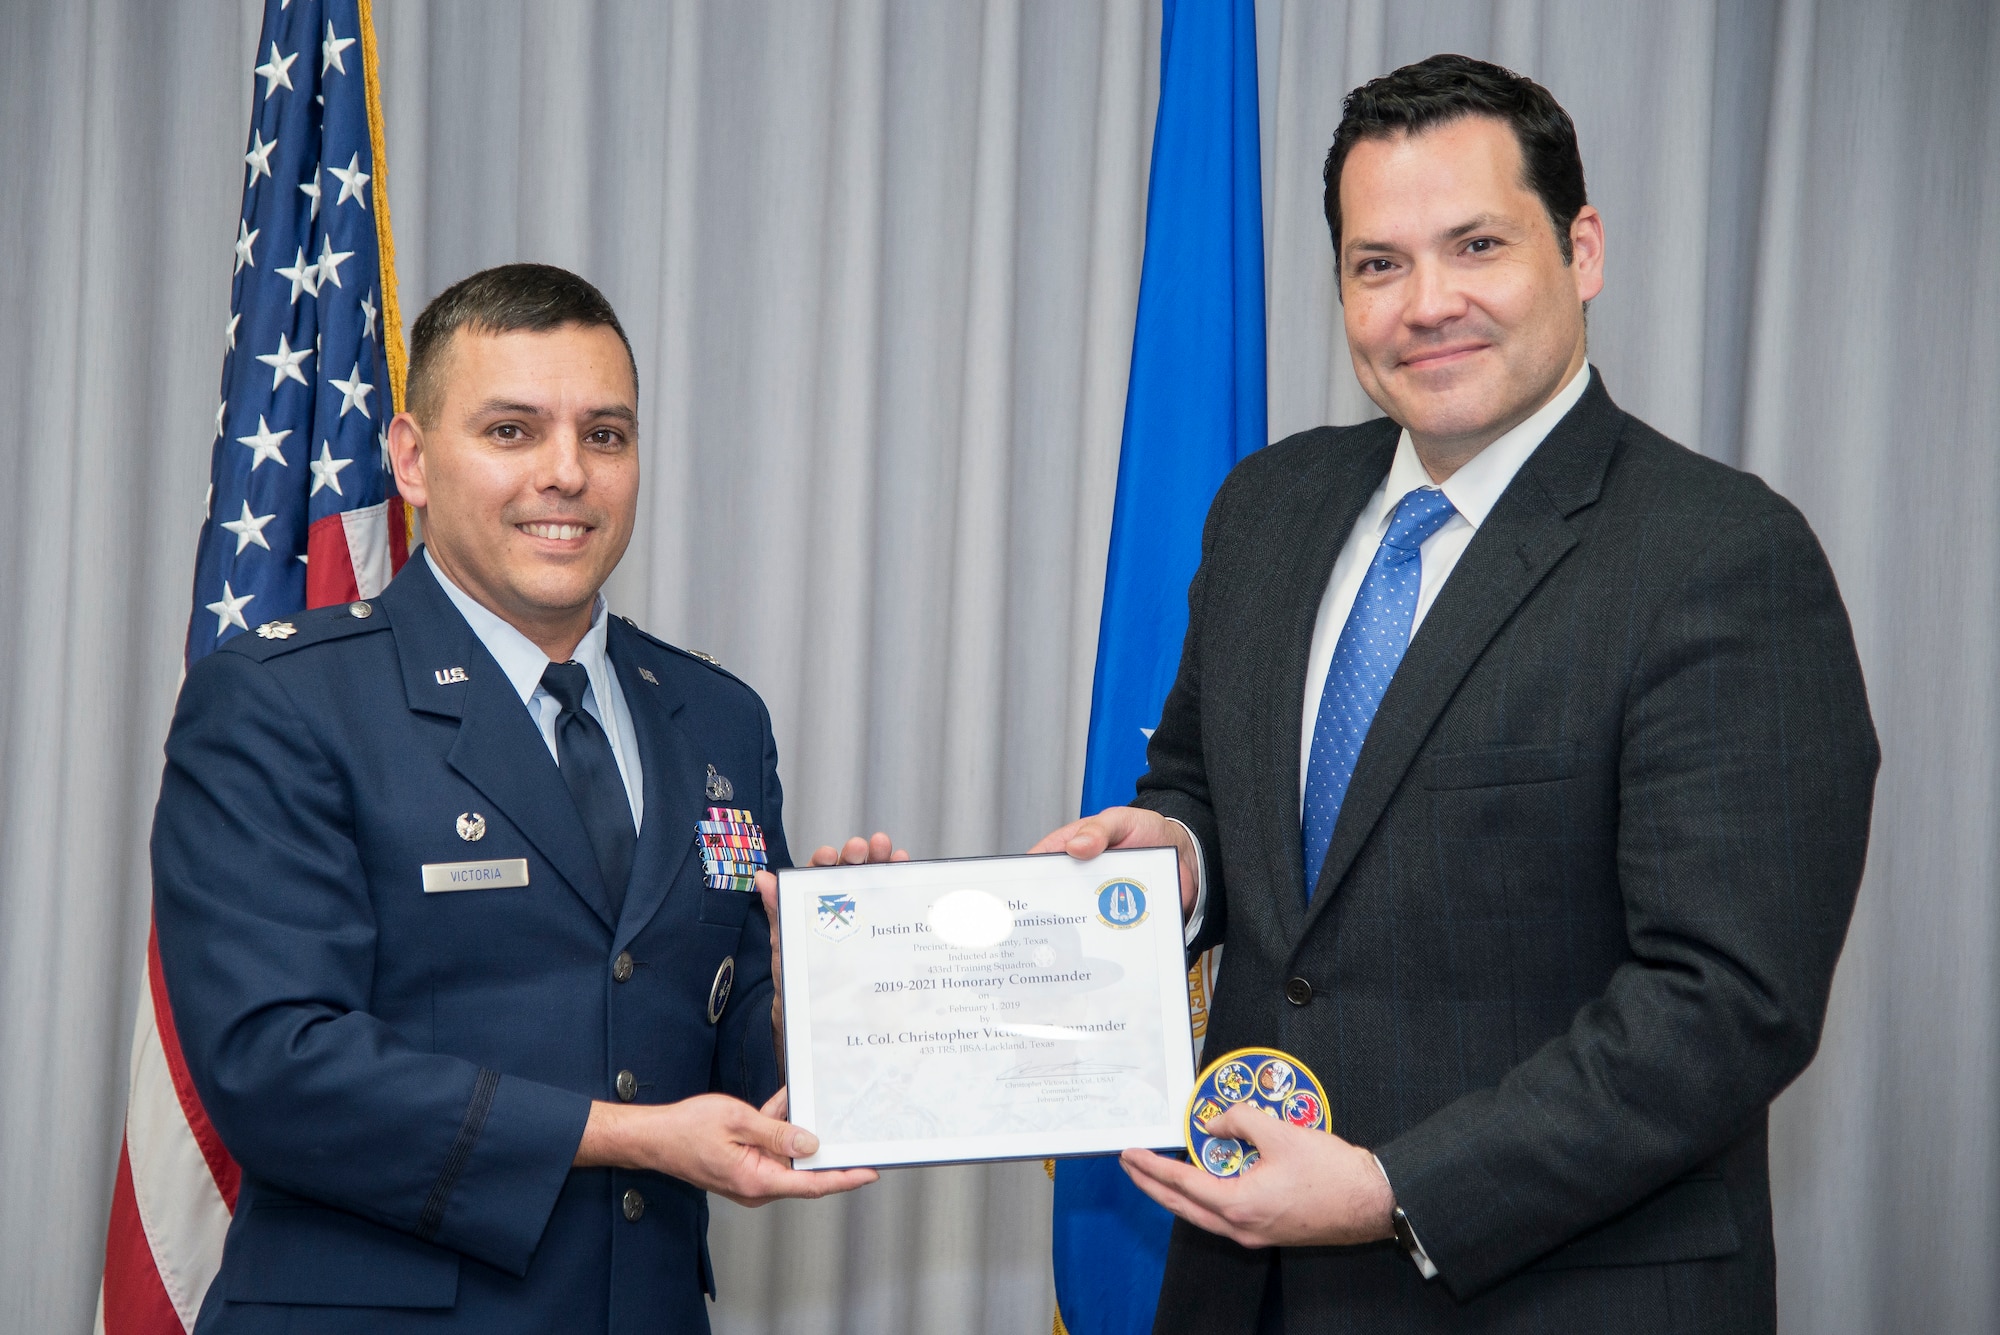 433rd Training Squadron Commander Lt. Col. Christopher Victoria presents the induction certificate to the squadron’s new honorary commander, Bexar County Precinct 2 Commissioner Justin Rodriguez, during the Feb. 1 honorary commander induction ceremony held at Joint Base San Antonio-Randolph, Texas. (U.S. Air Force photo by Sean Worrell)